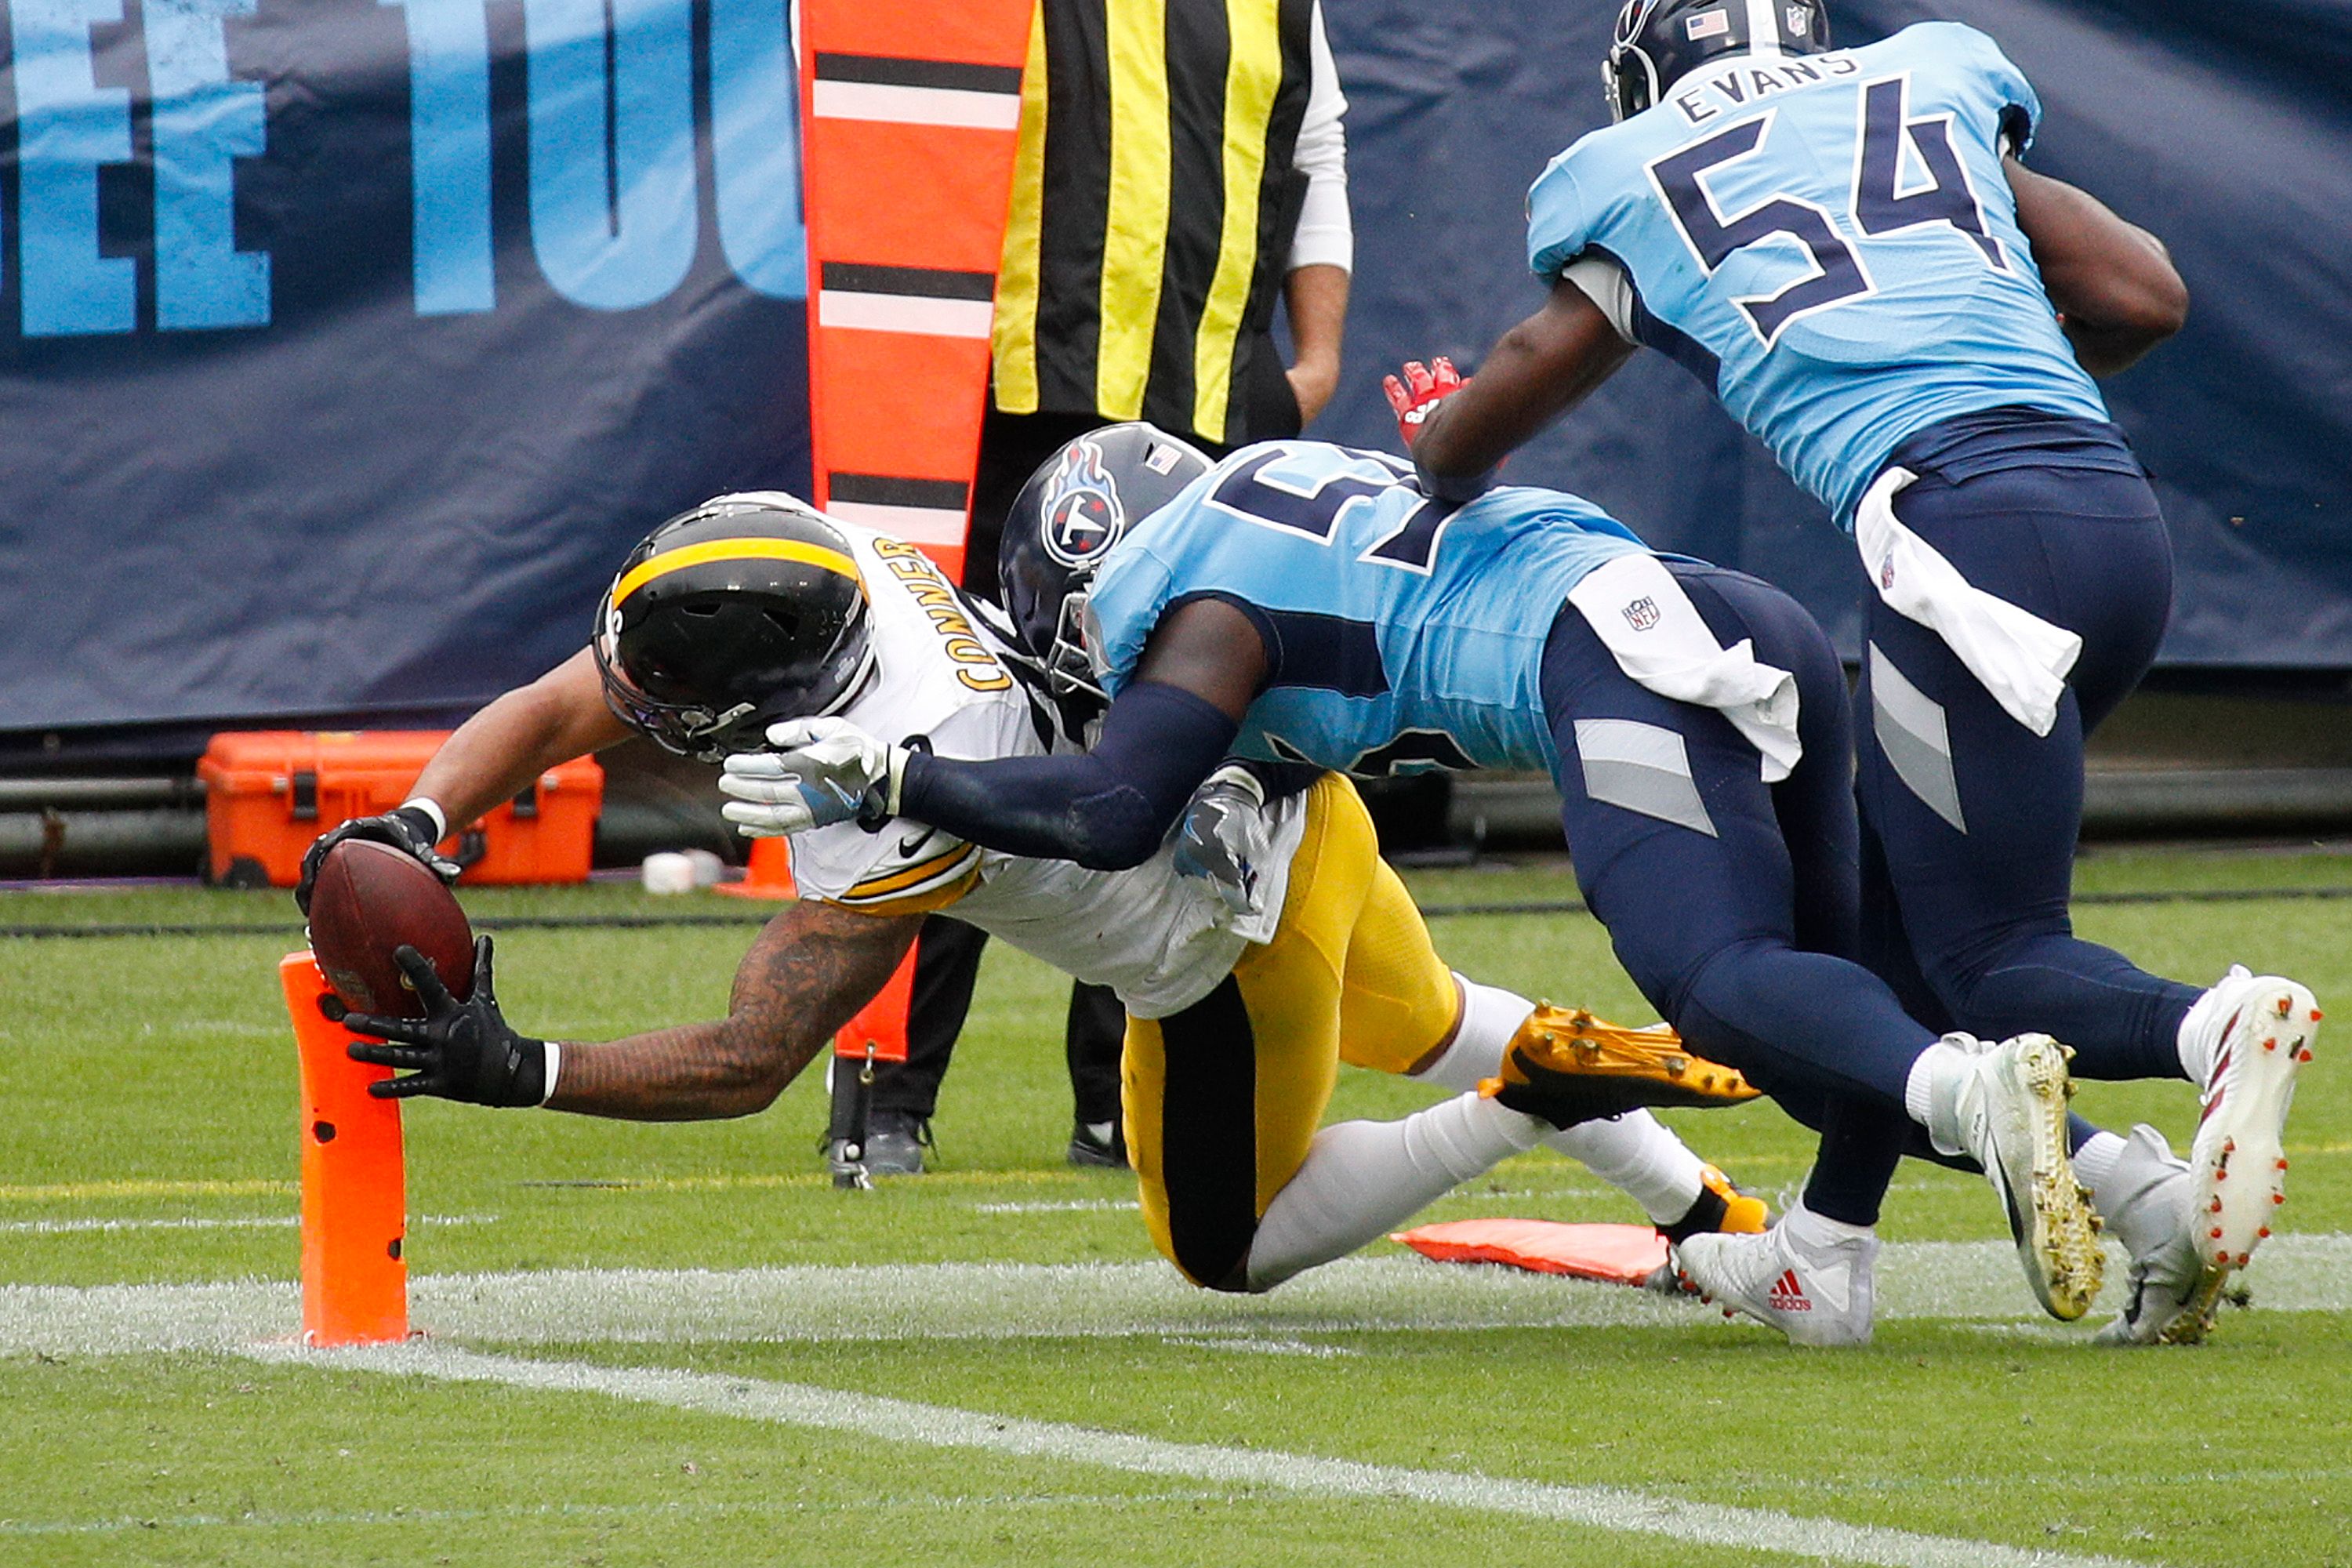 An NFL player reaches the ball over the endzone.